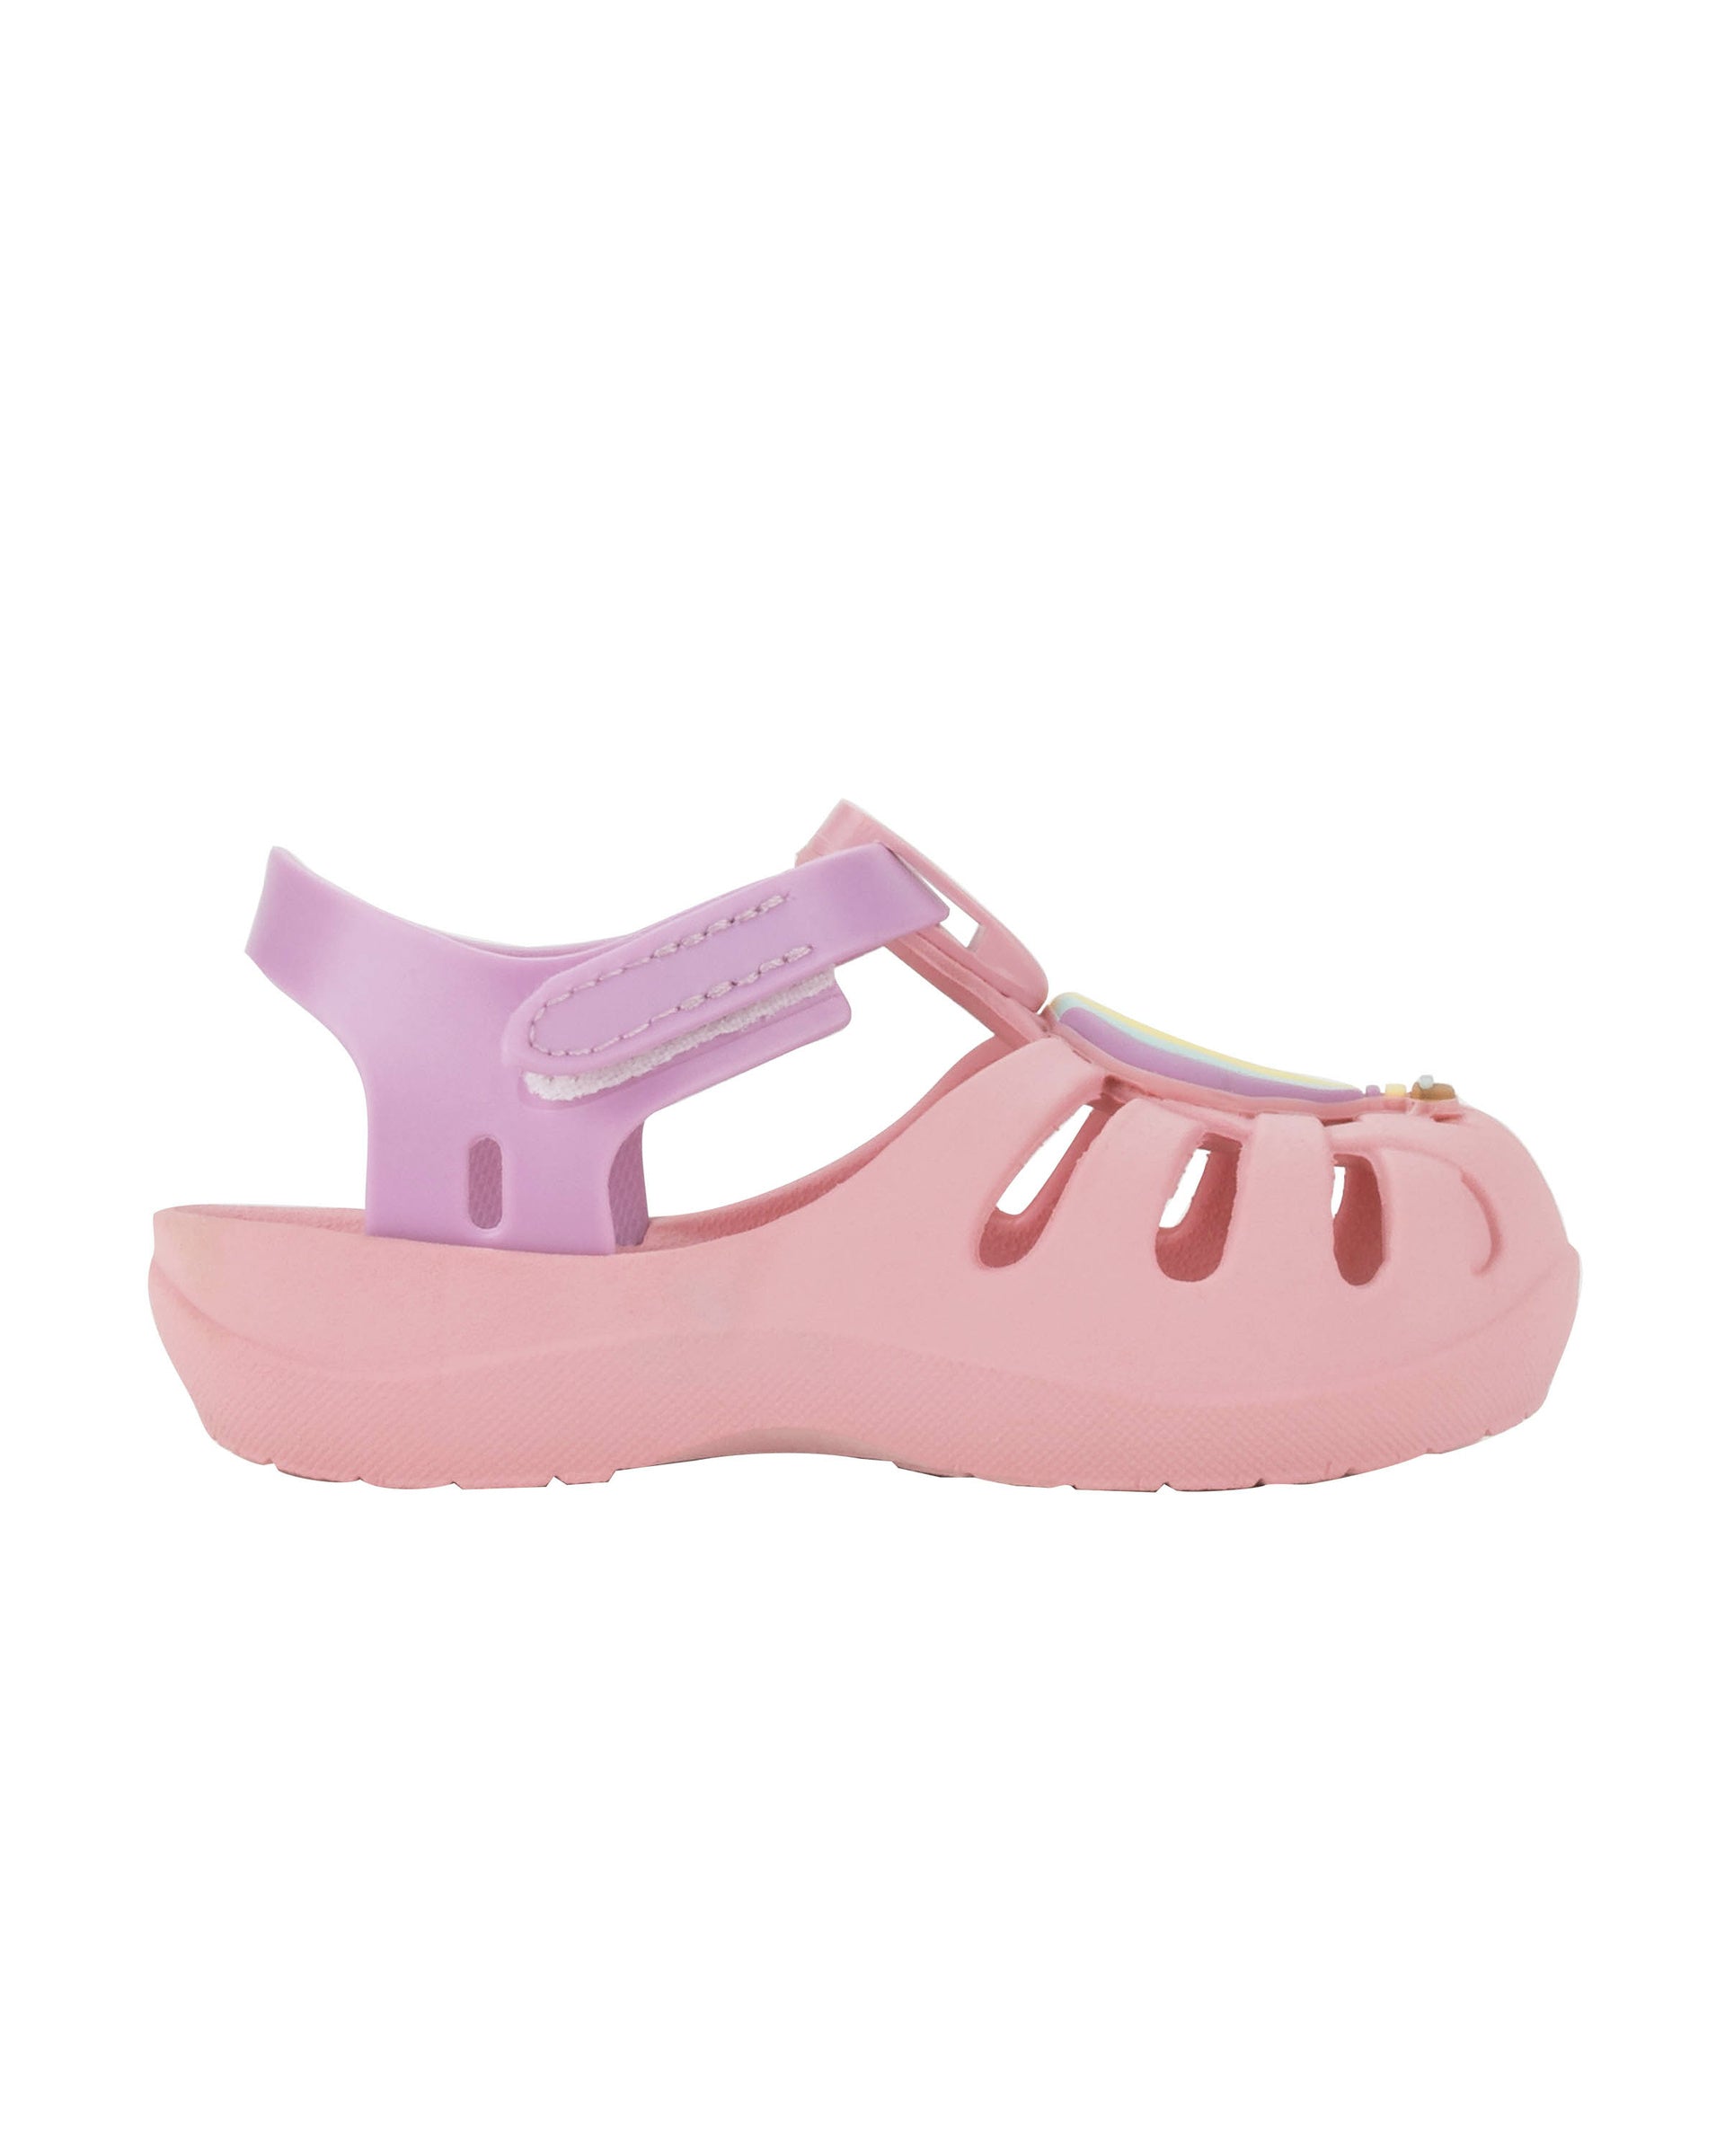 Outer side view of a pink Ipanema Summer baby sandal with hot air balloon on the upper.